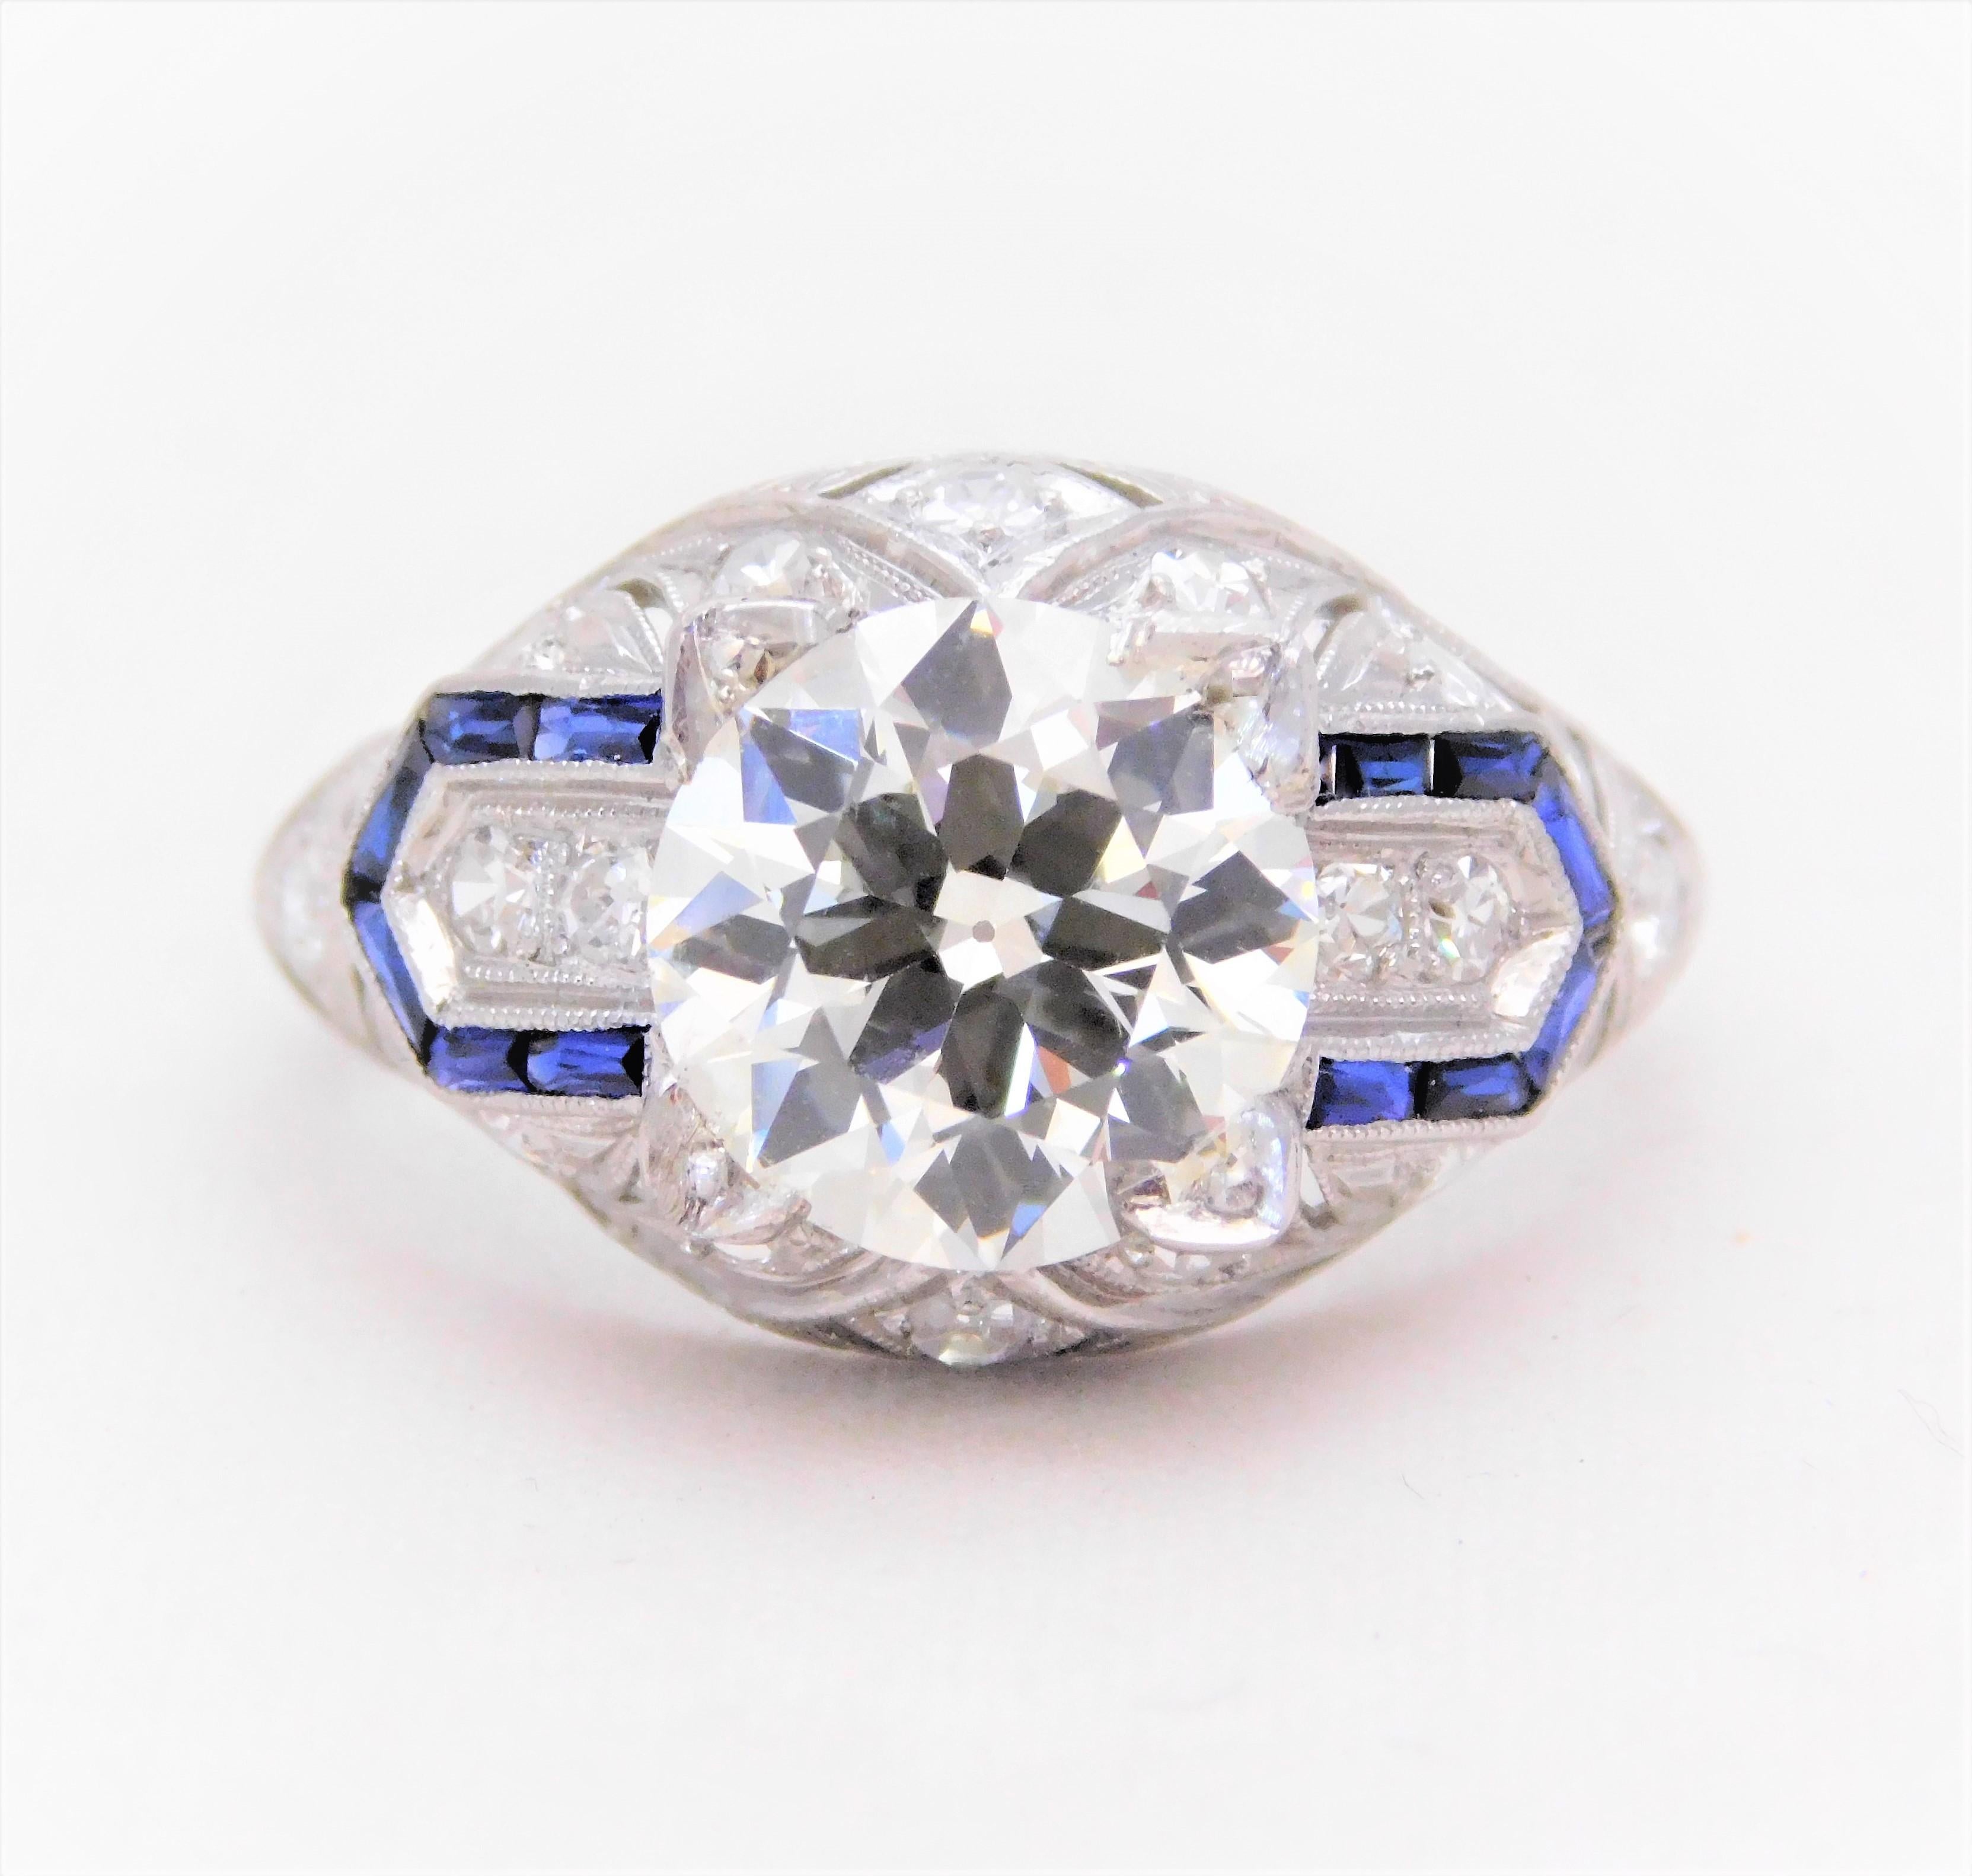 Art Deco 3.41 Carat Platinum Diamond and Sapphire Engagement Ring, circa 1930 In Excellent Condition For Sale In Metairie, LA